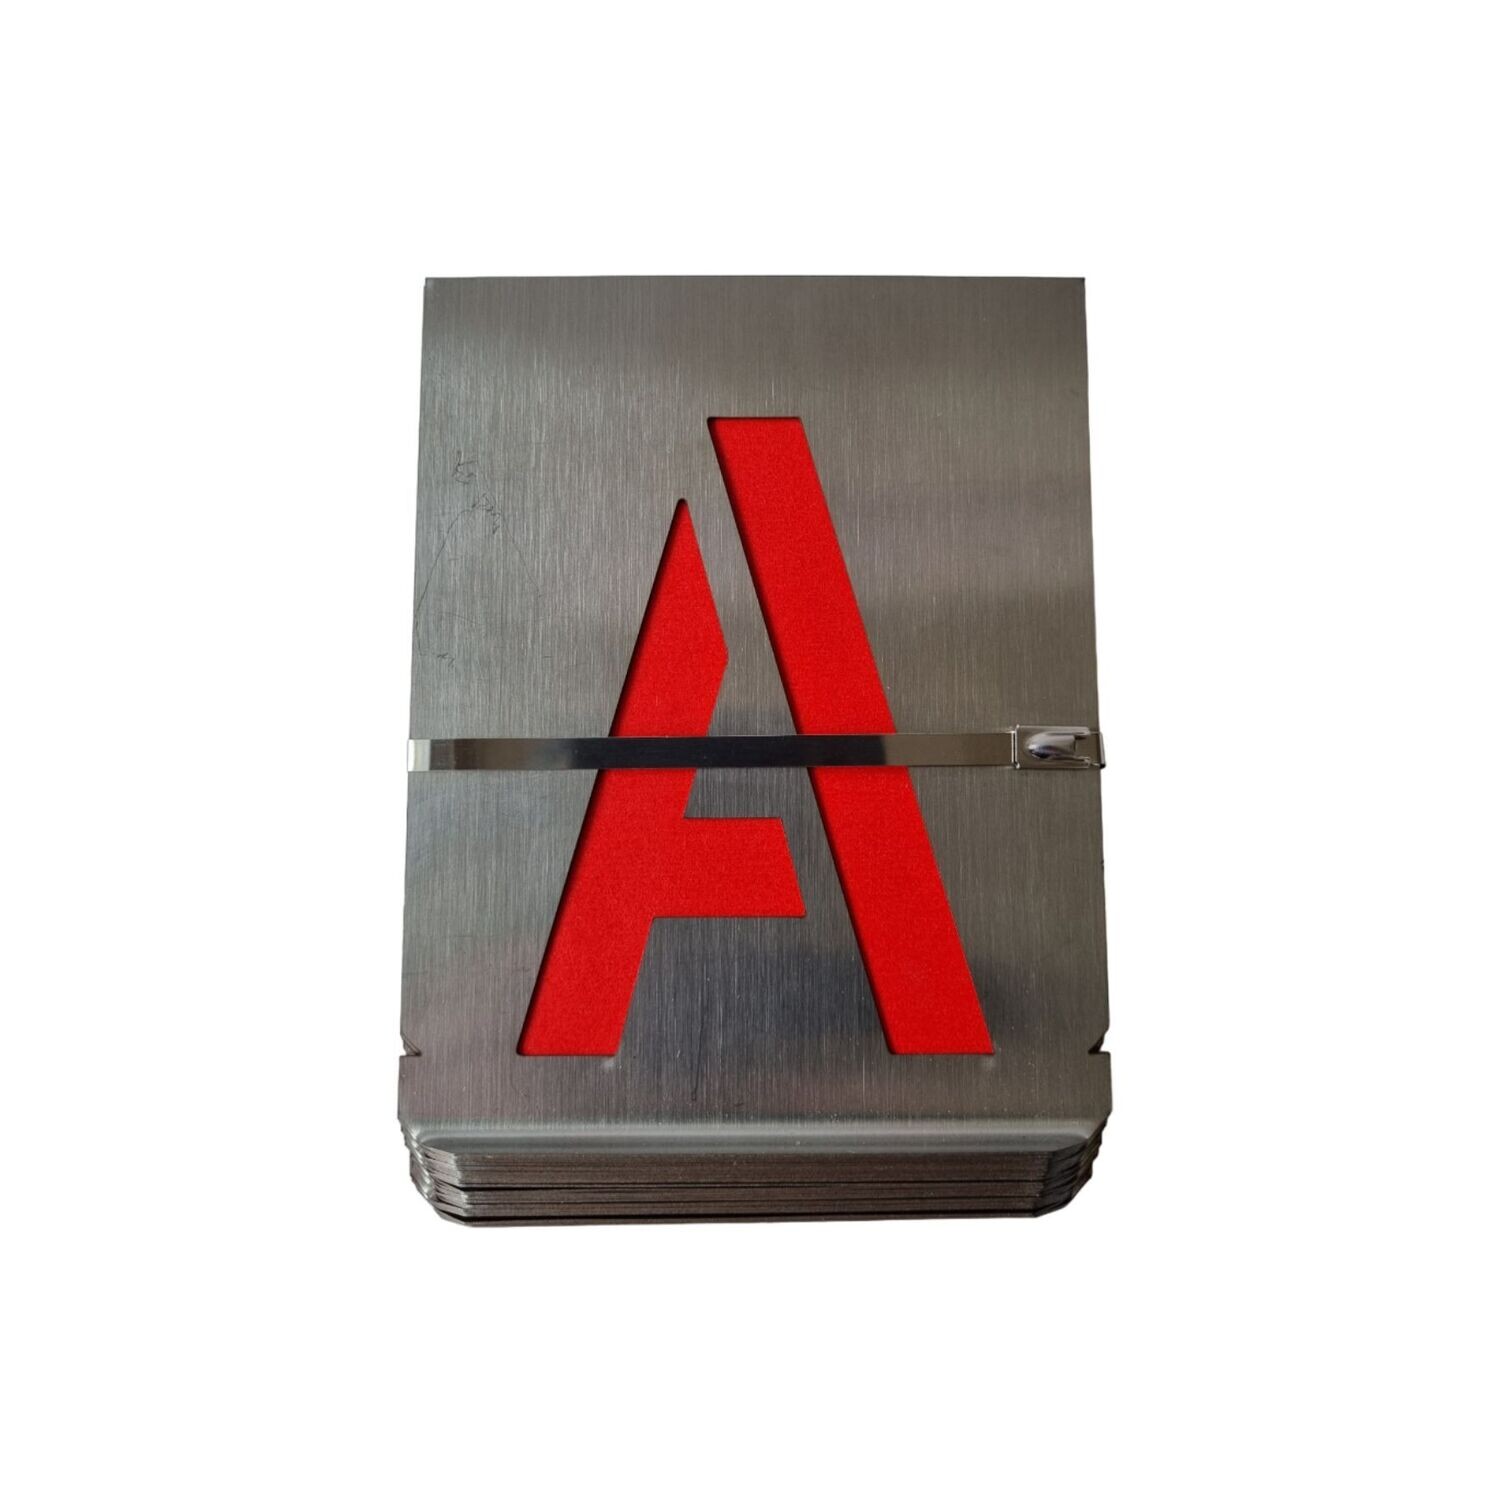 Stainless Steel Letter Stencil Set A-Z